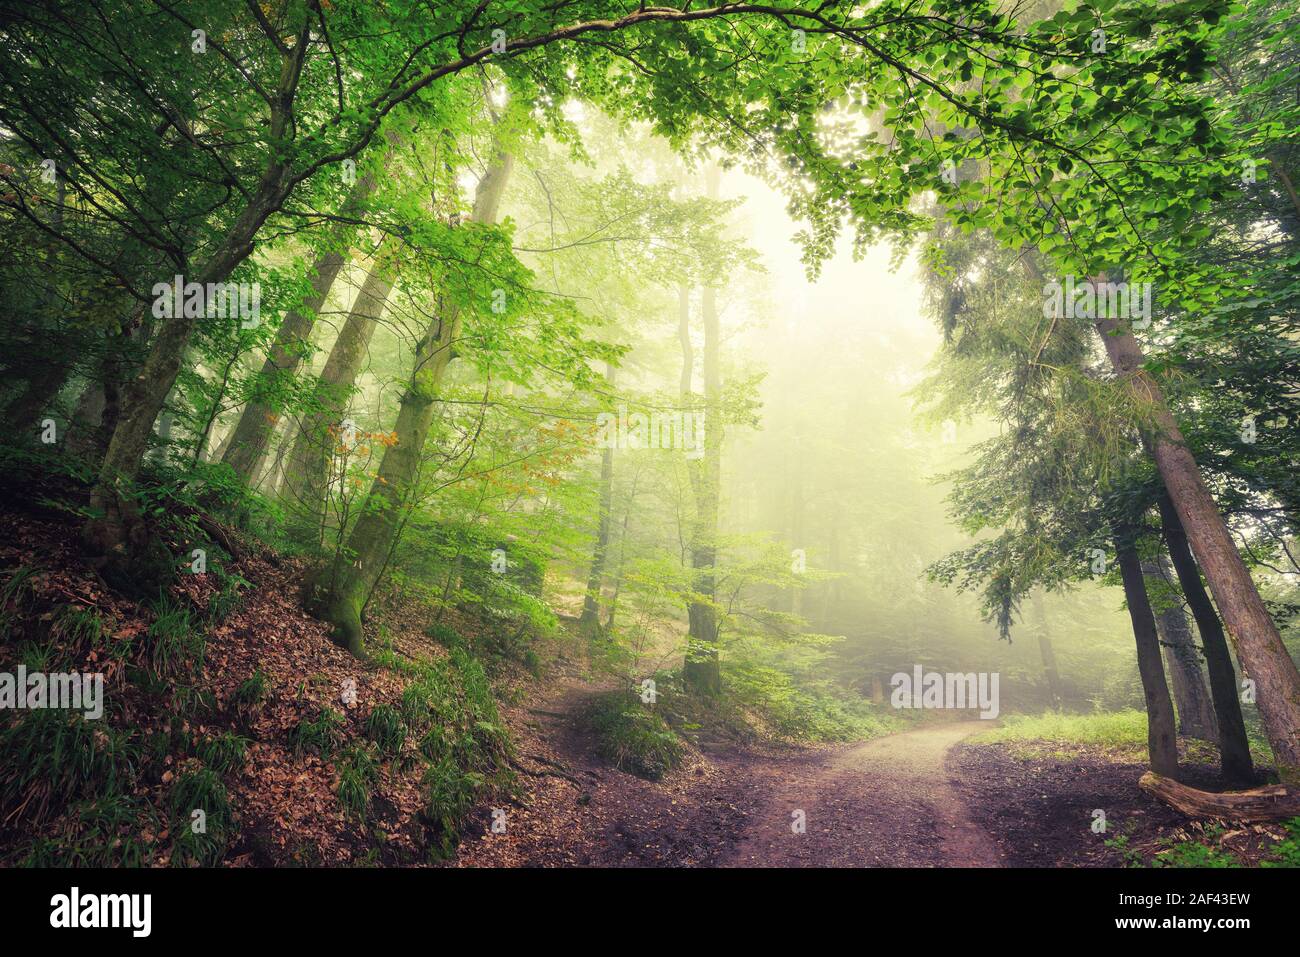 Scenic forest landscape with a large natural archway composed of green trees over a path inviting into the misty light Stock Photo